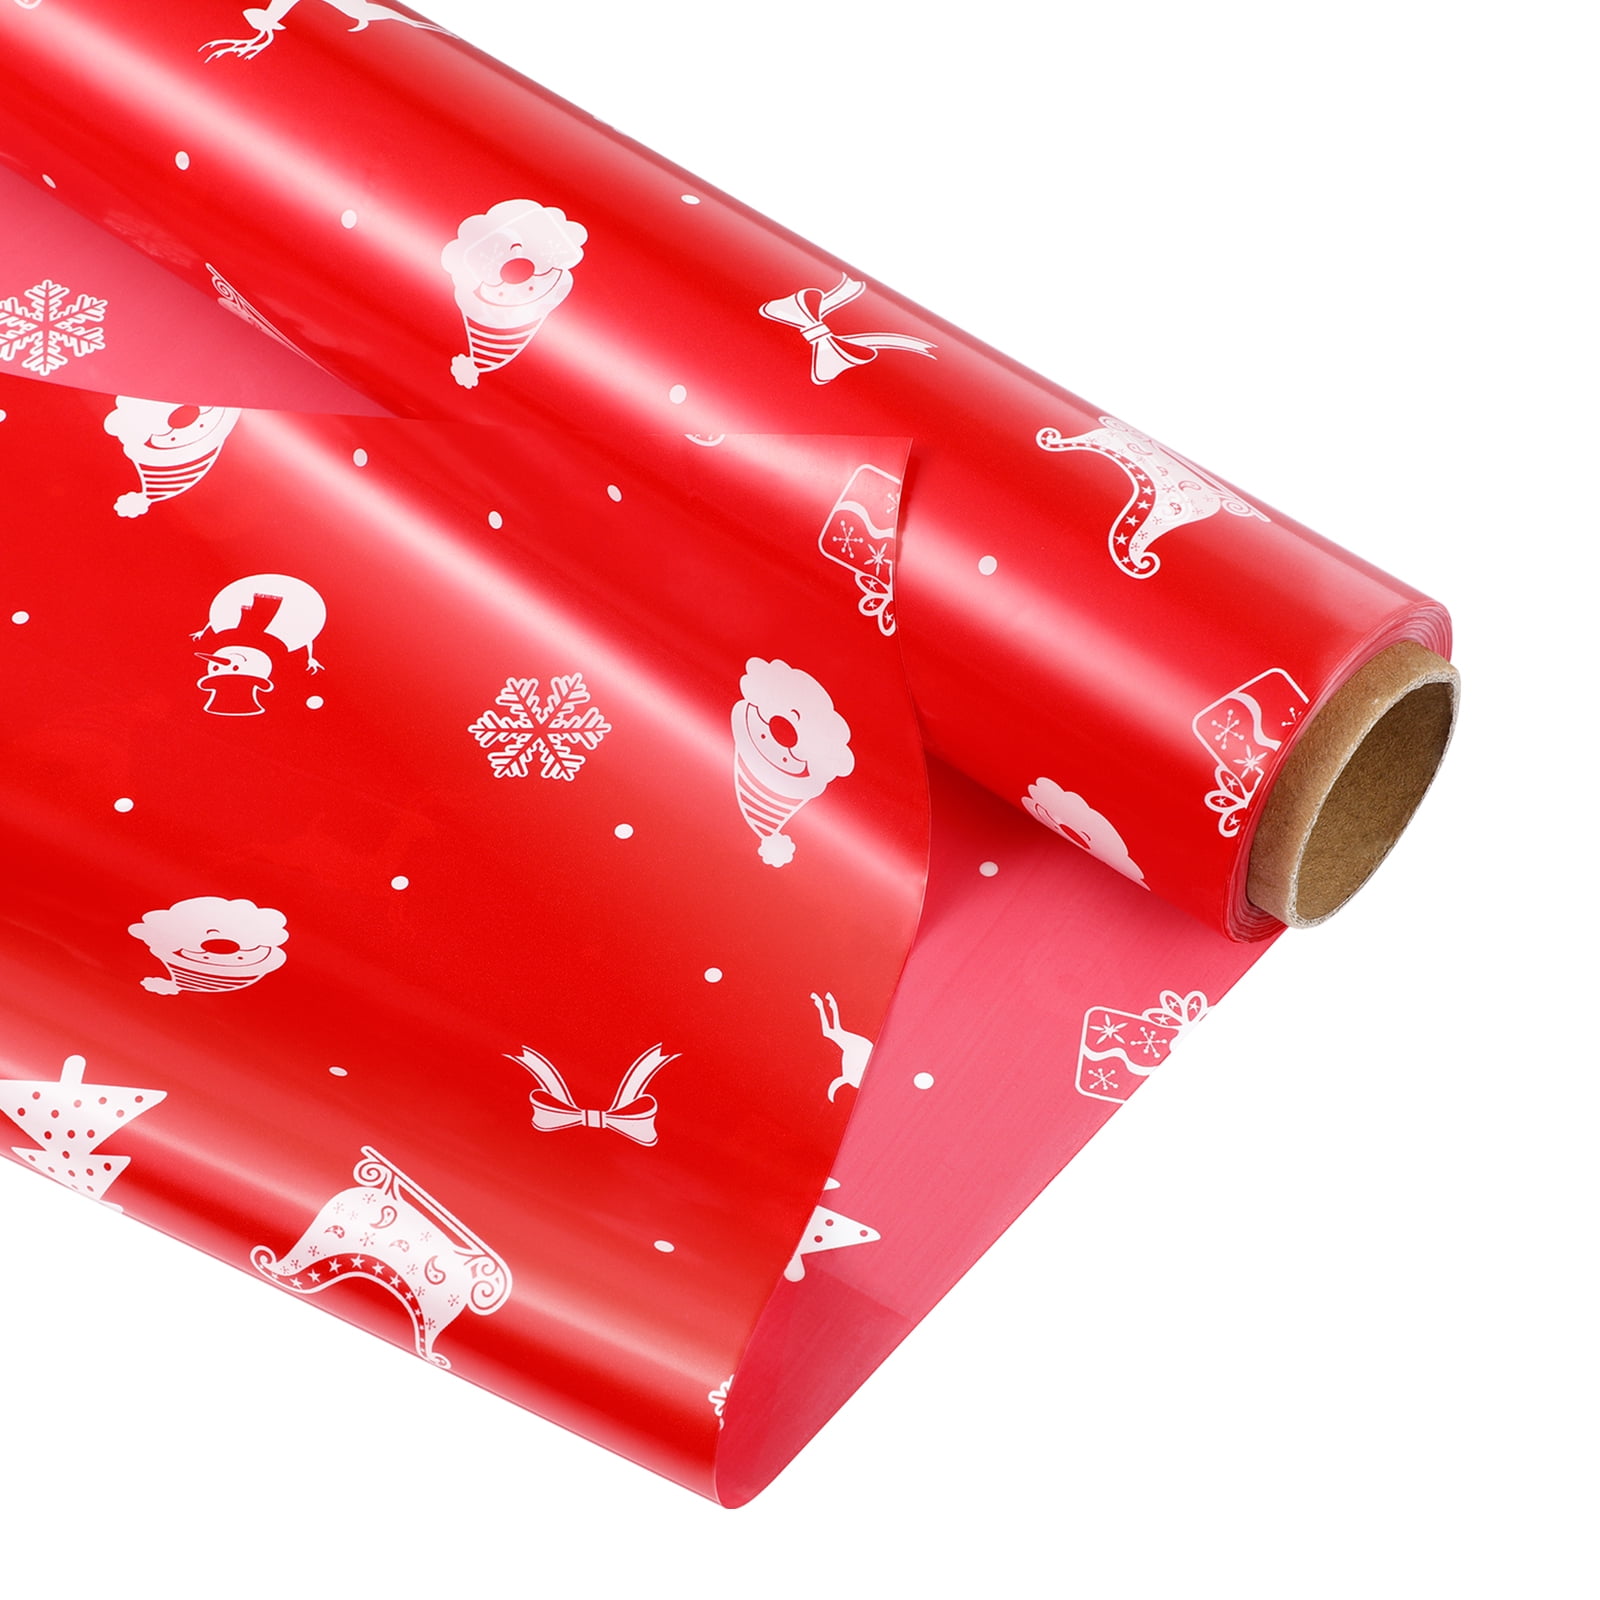 Jamming Santa DJ Christmas Thick Wrapping Paper, Xmas Musical Rave Holiday,  Music Party Theme (6 foot x 30 inch roll)